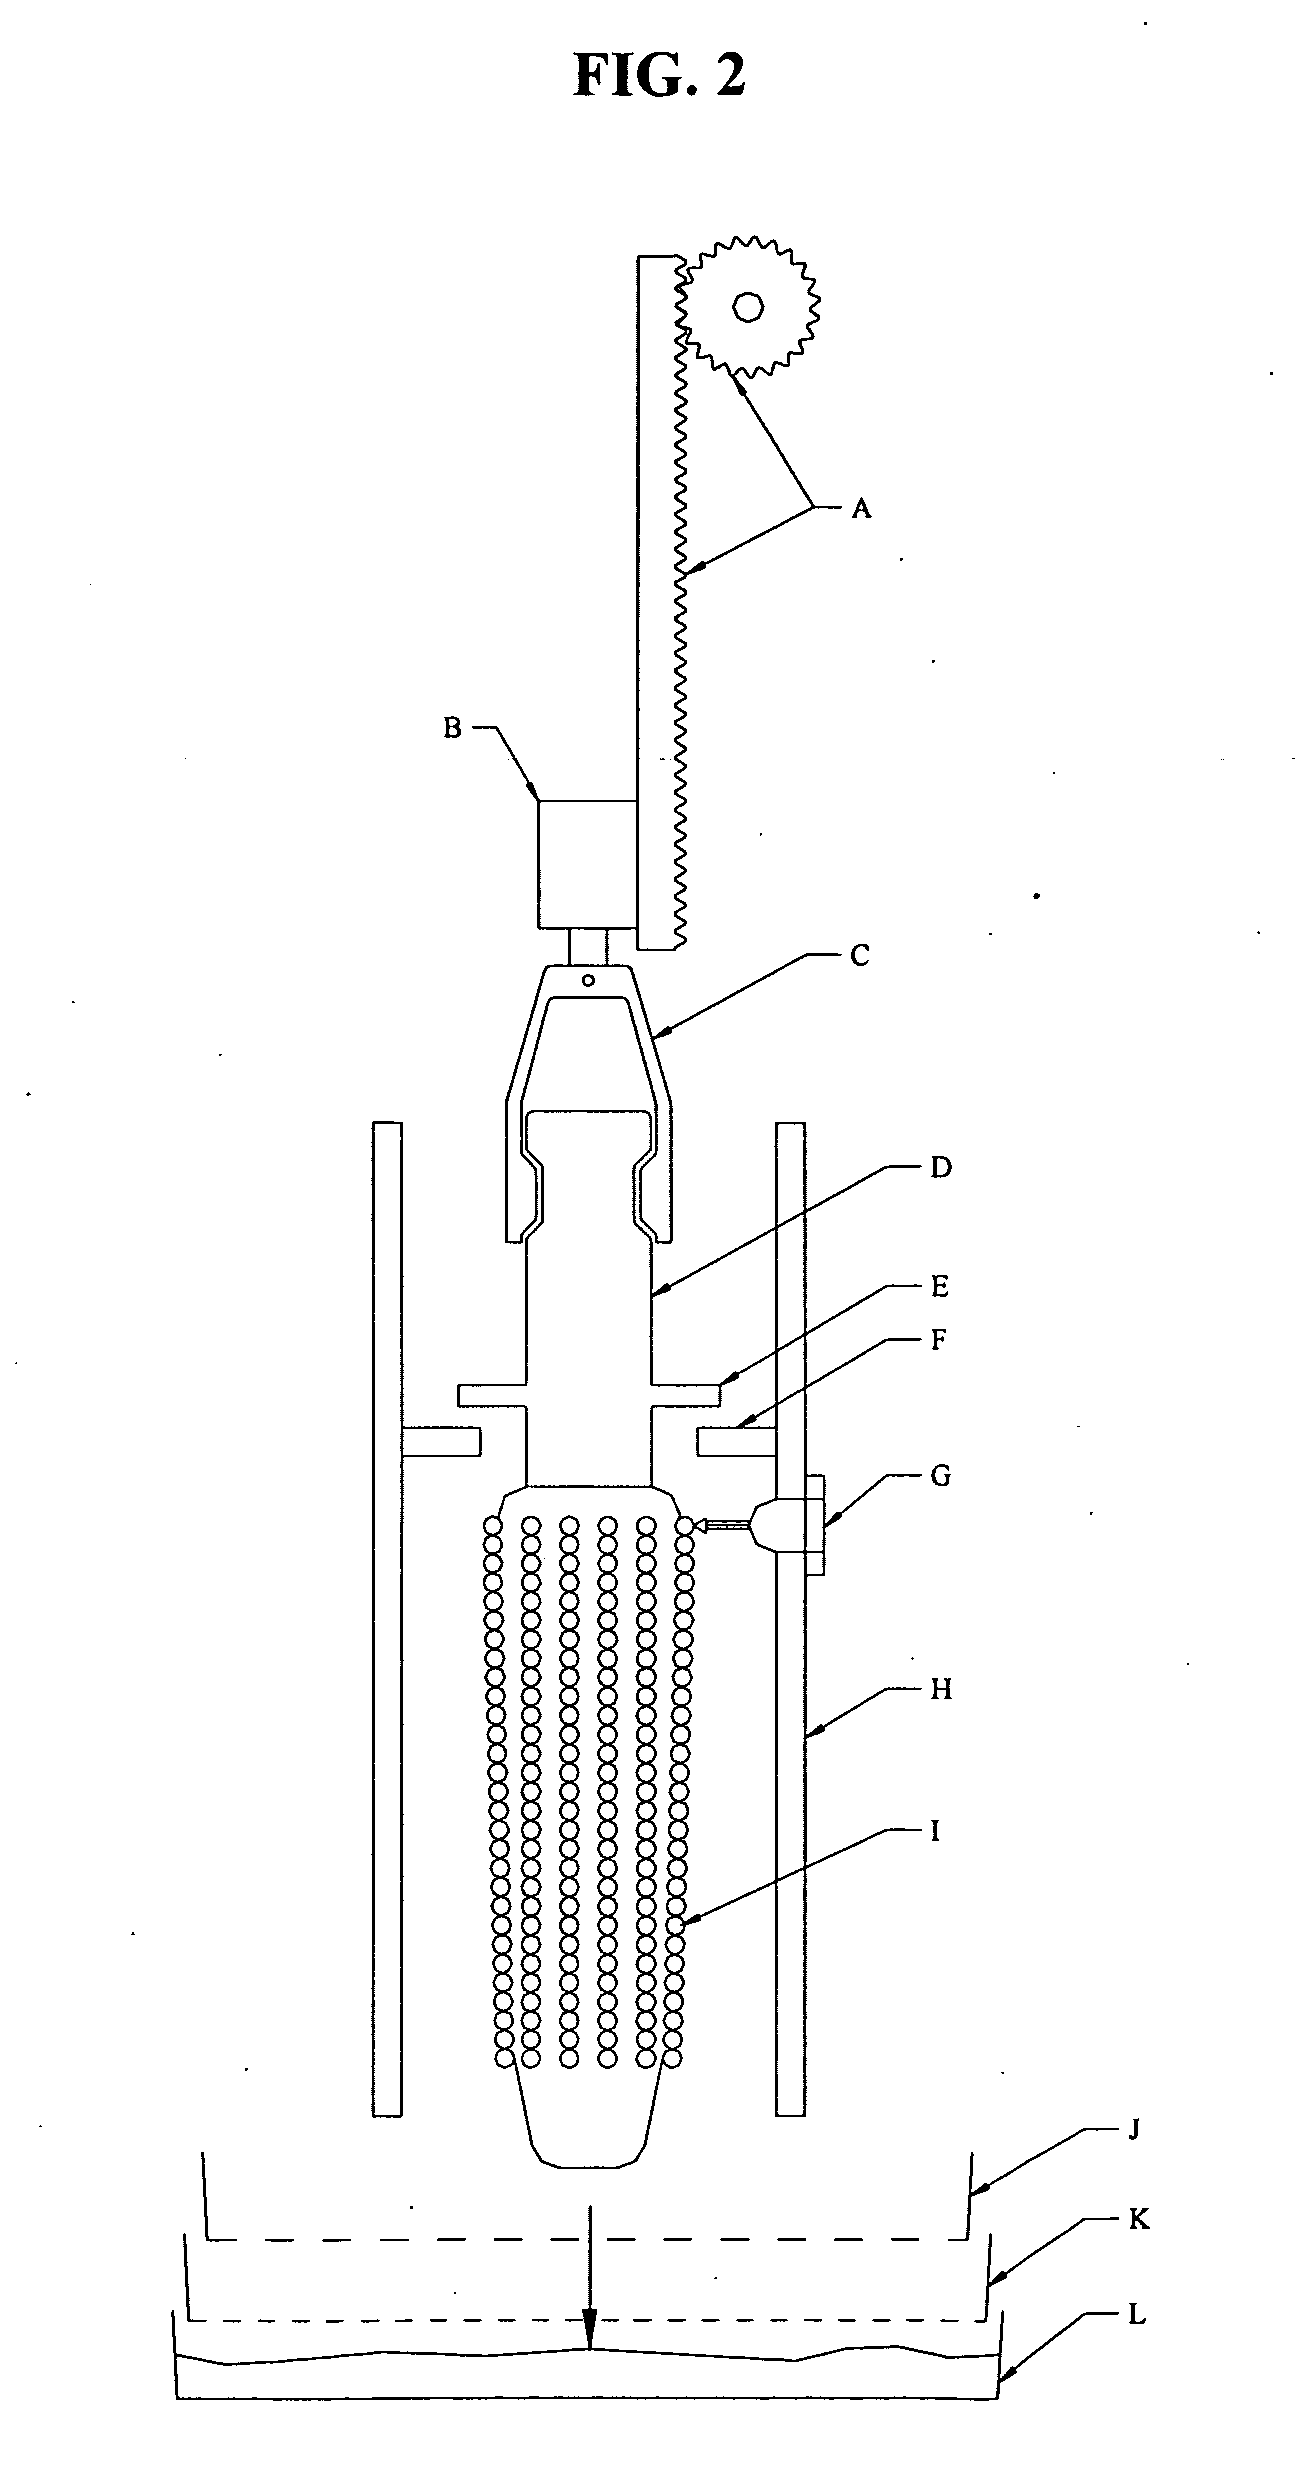 Method and apparatus for substantially isolating plant tissues